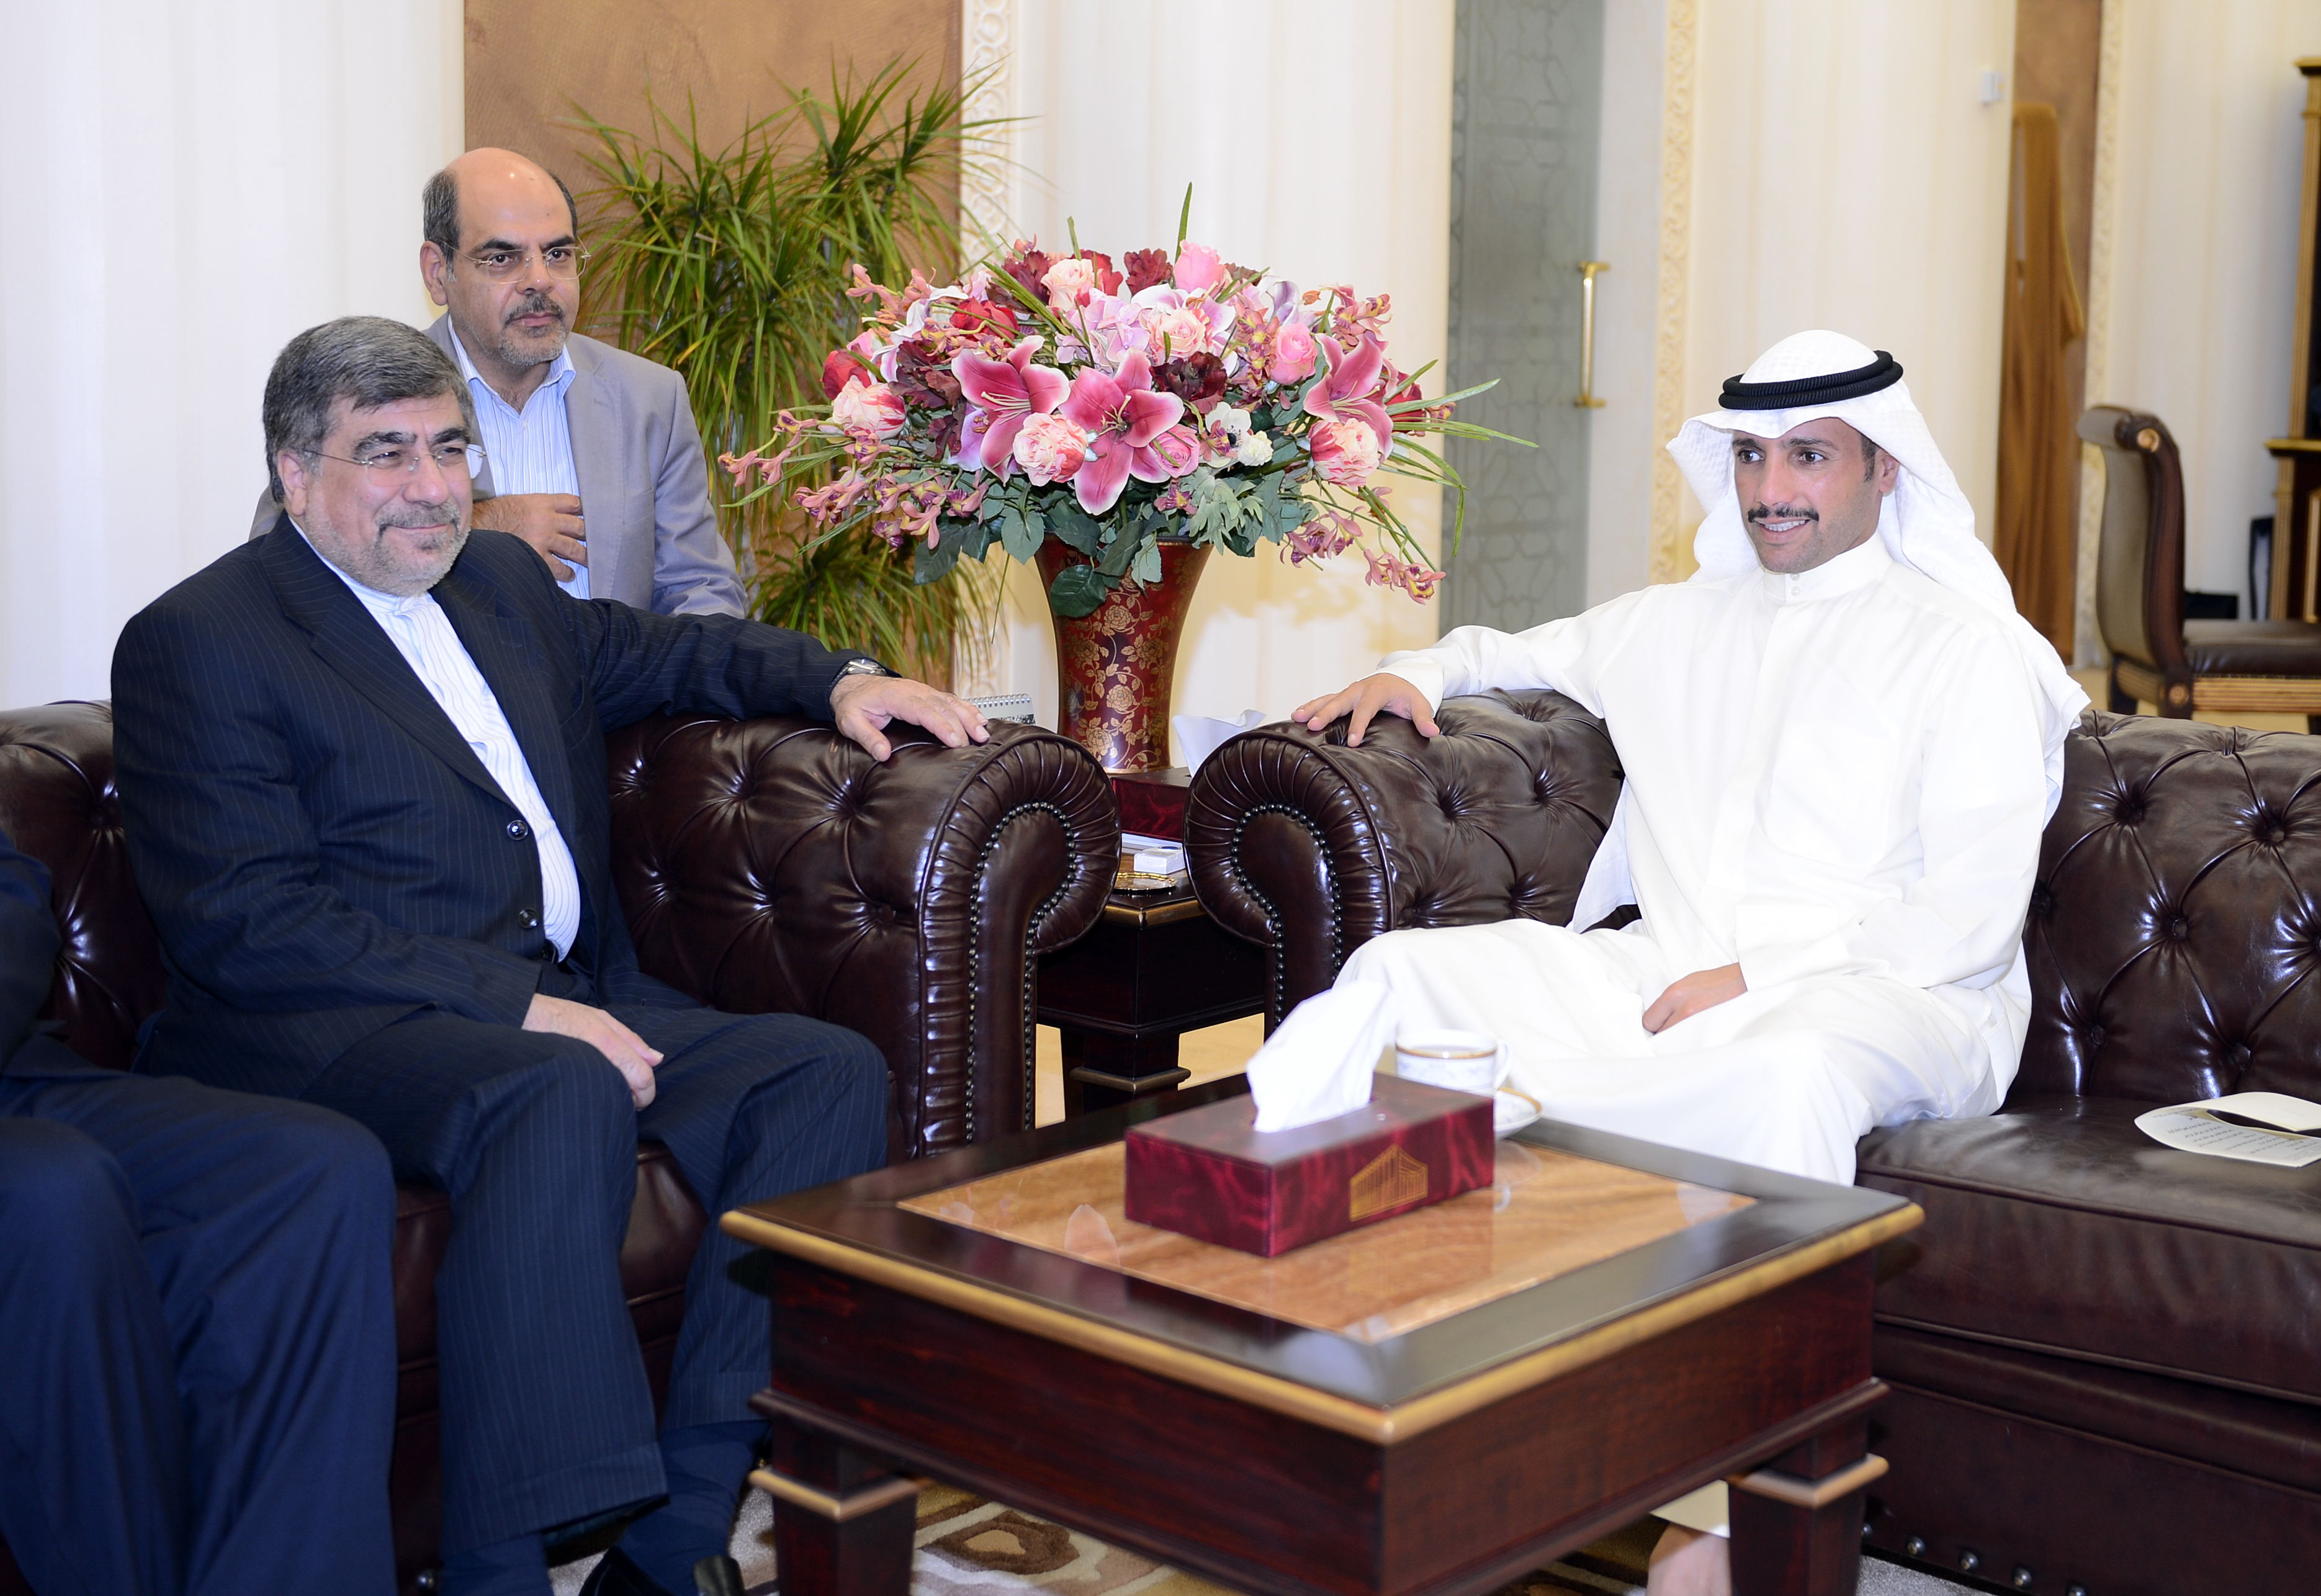 Iranian Minister of Culture and Islamic Guidance Dr. Ali Jannati with National Assembly Speaker Marzouq Al-Ghanim